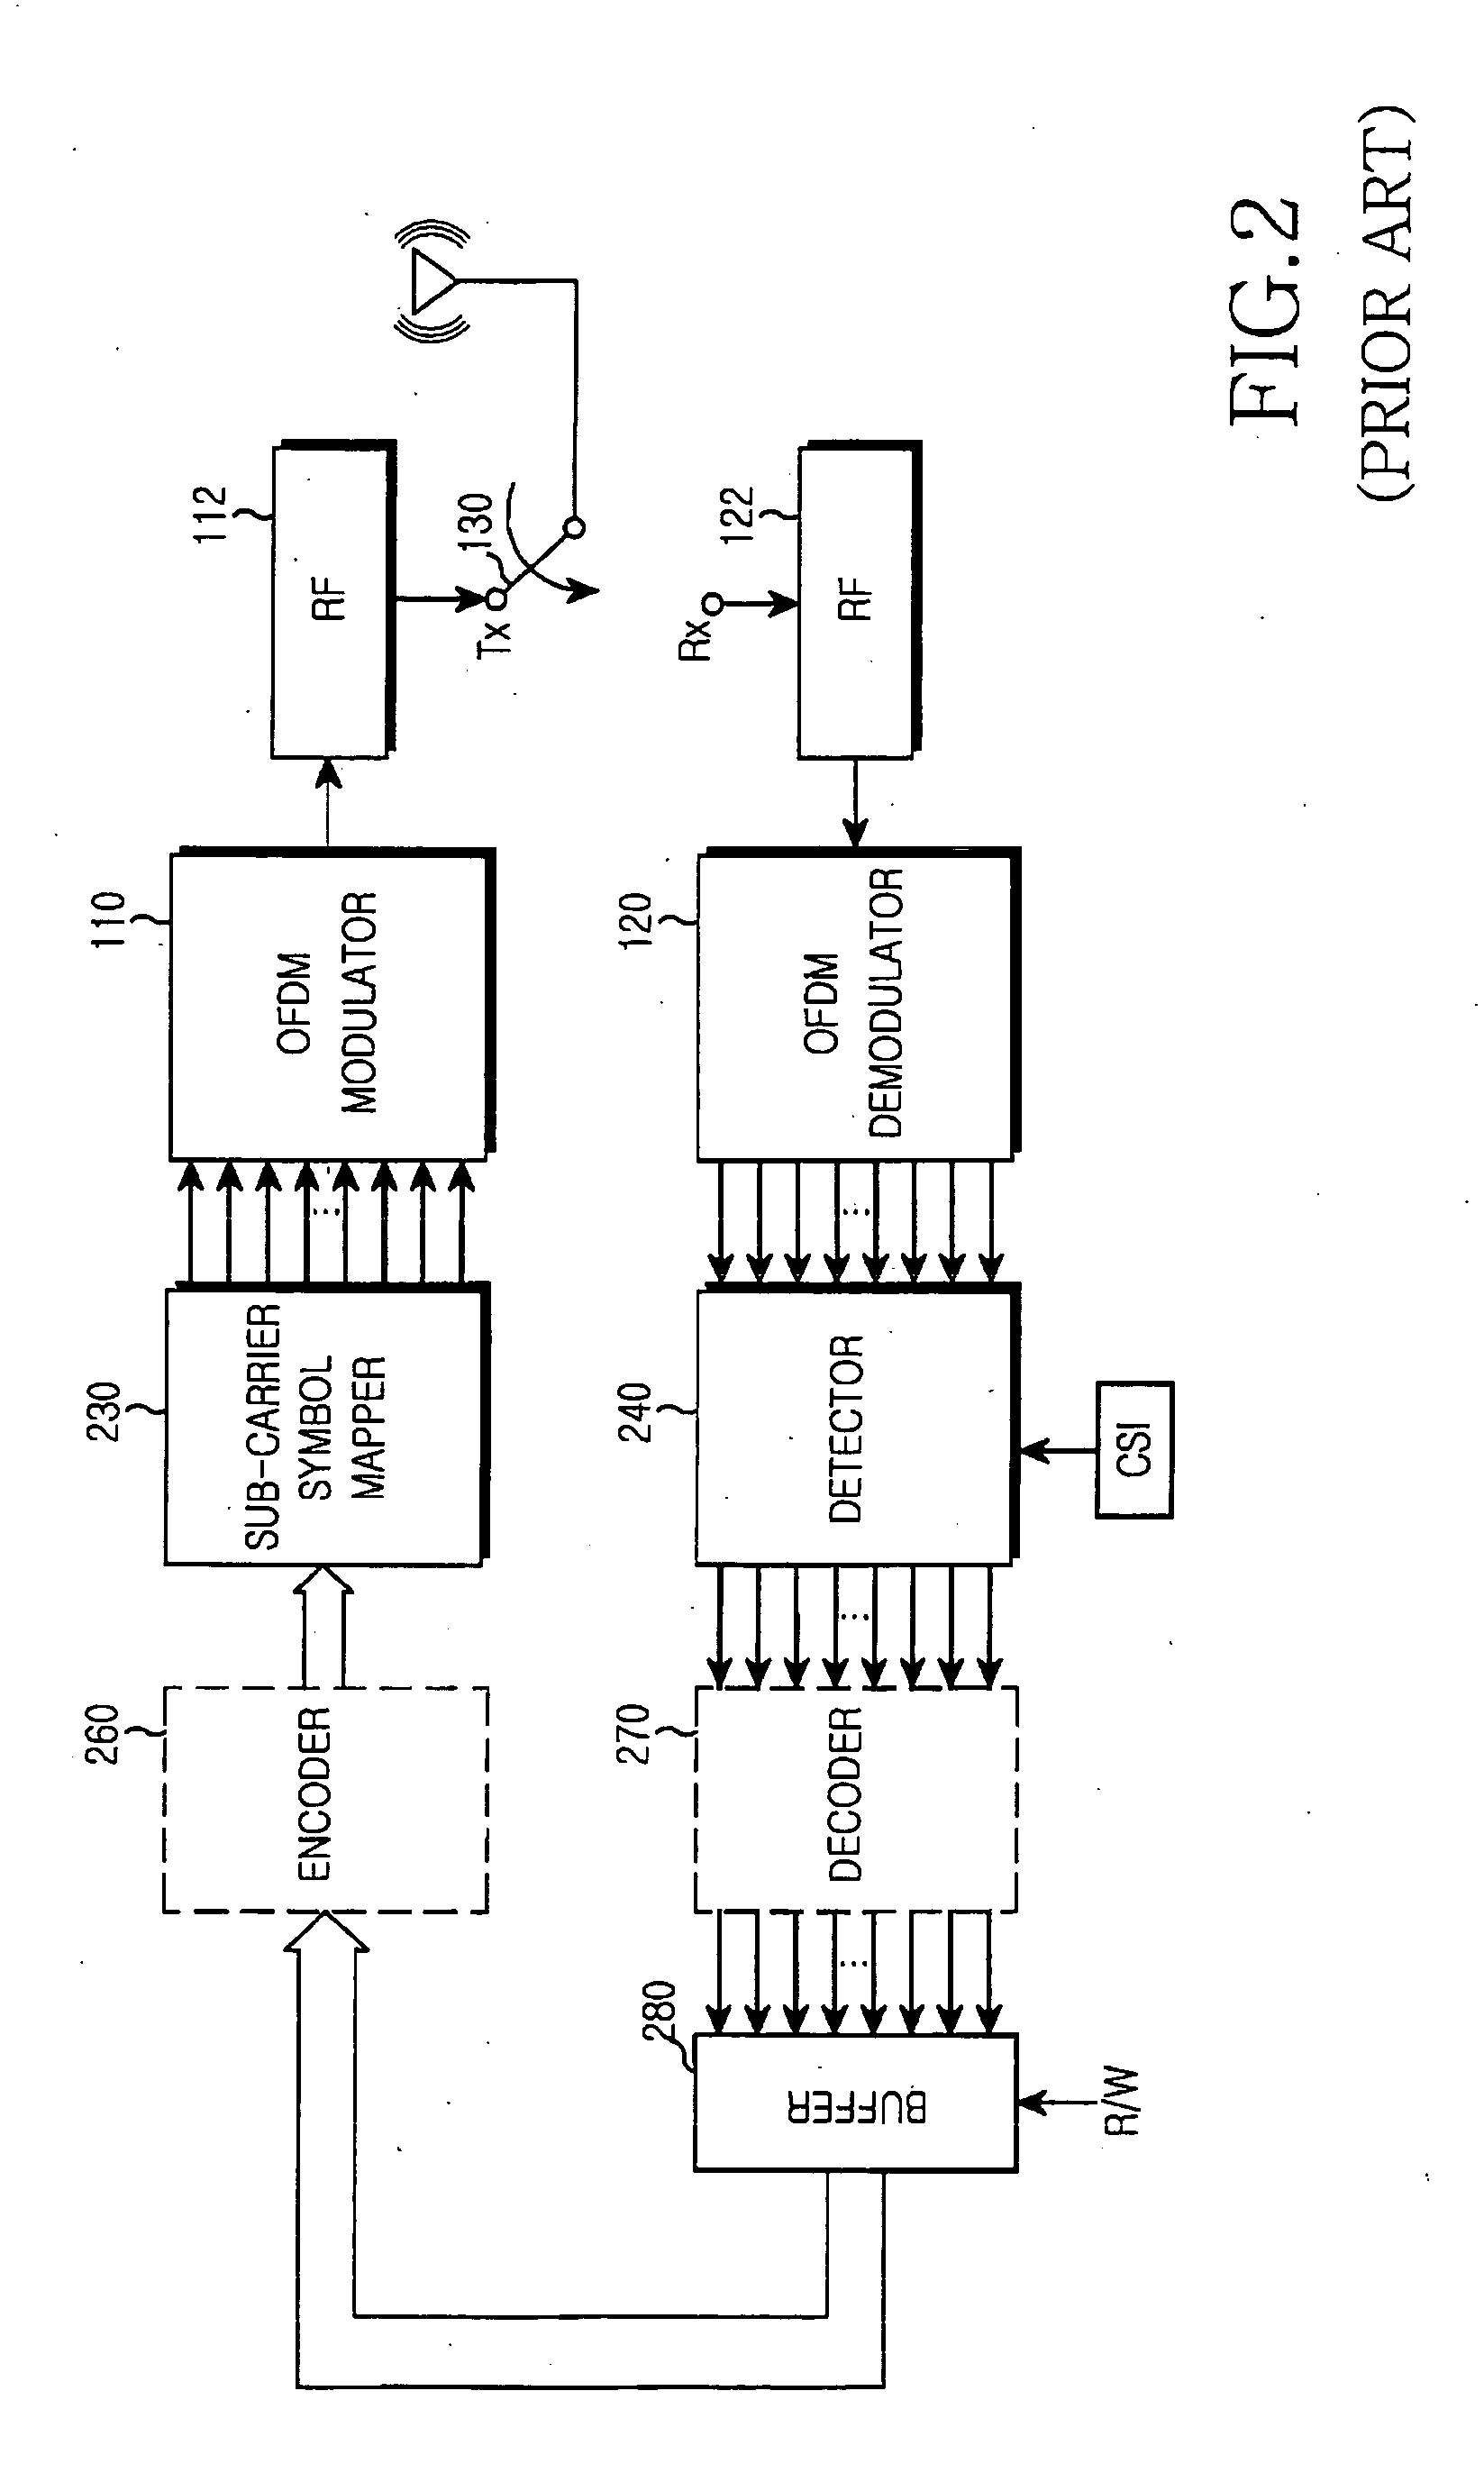 Hybrid forwarding apparatus and method for cooperative relaying in an OFDM network